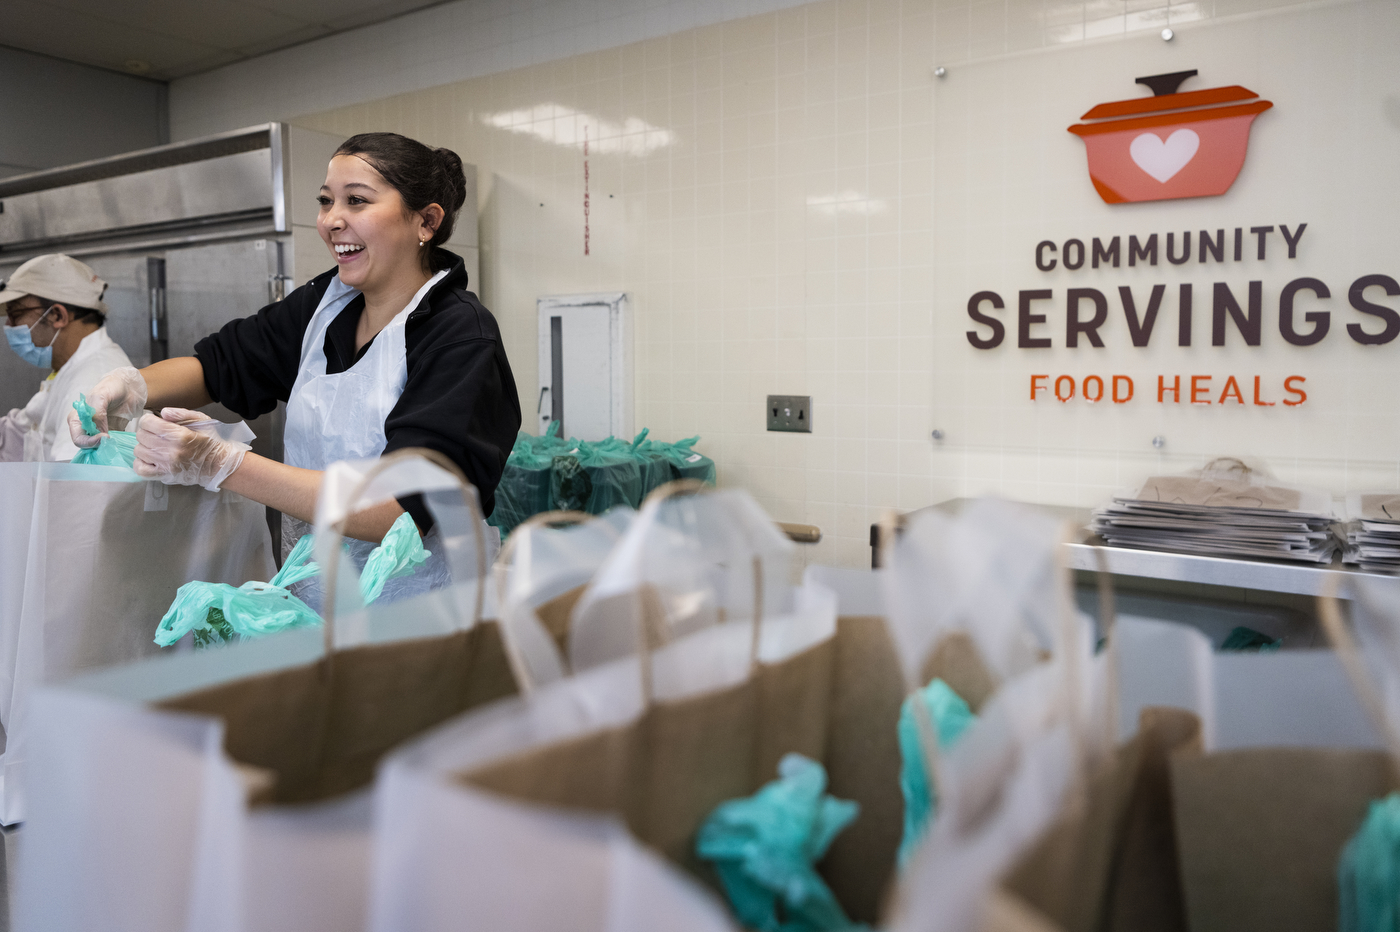 Carina Davis filling bags with food at Community Servings in Jamaica Plain